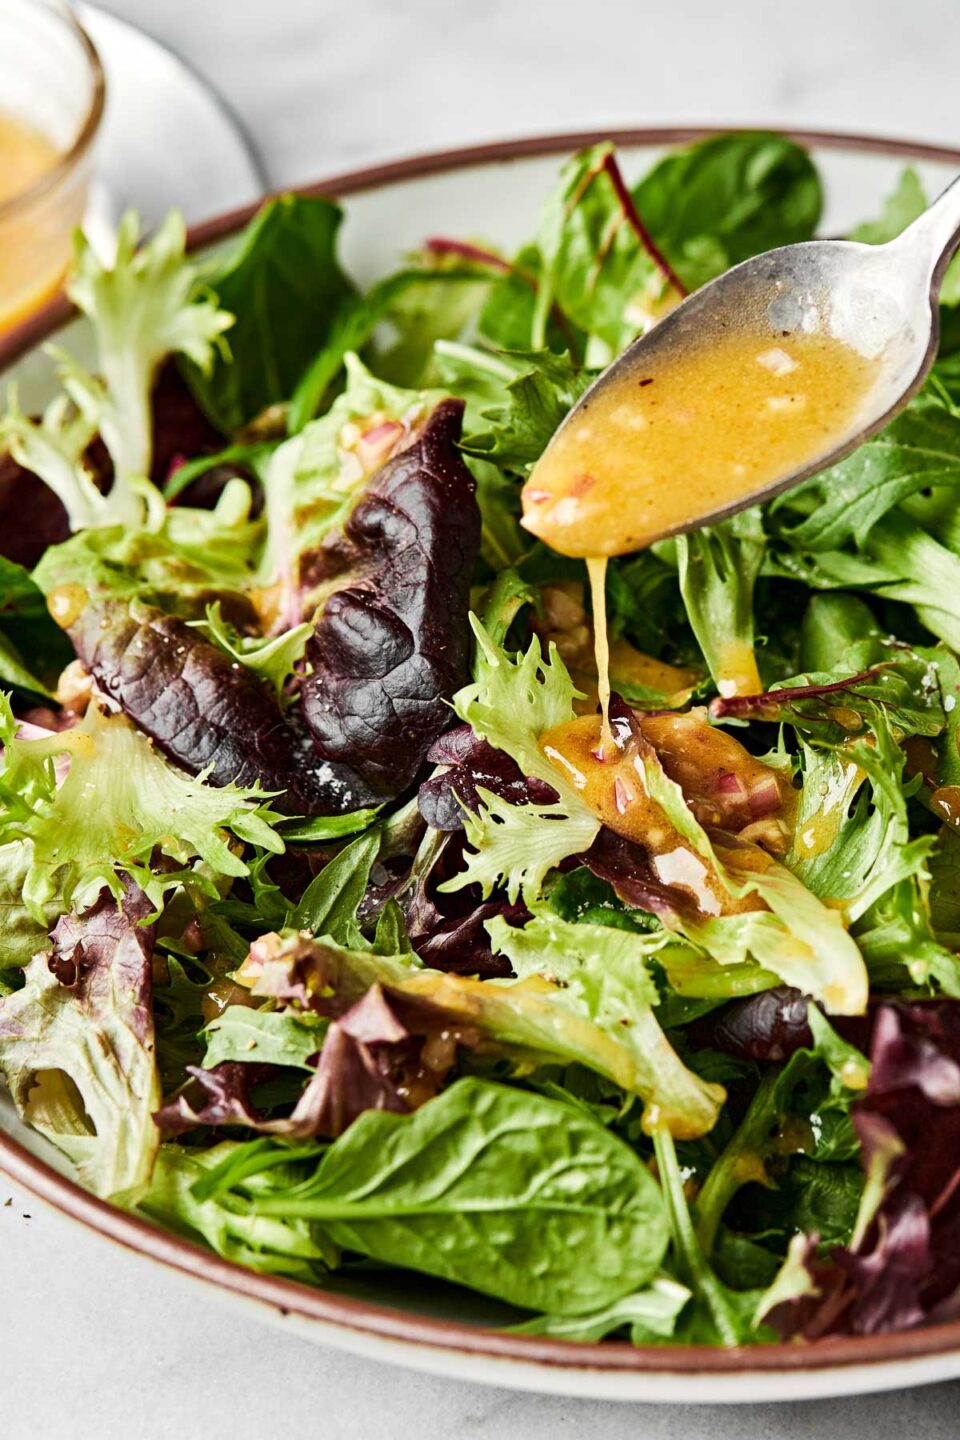 A close-up shot of a spoon drizzling dressing over a bowl of mixed greens.